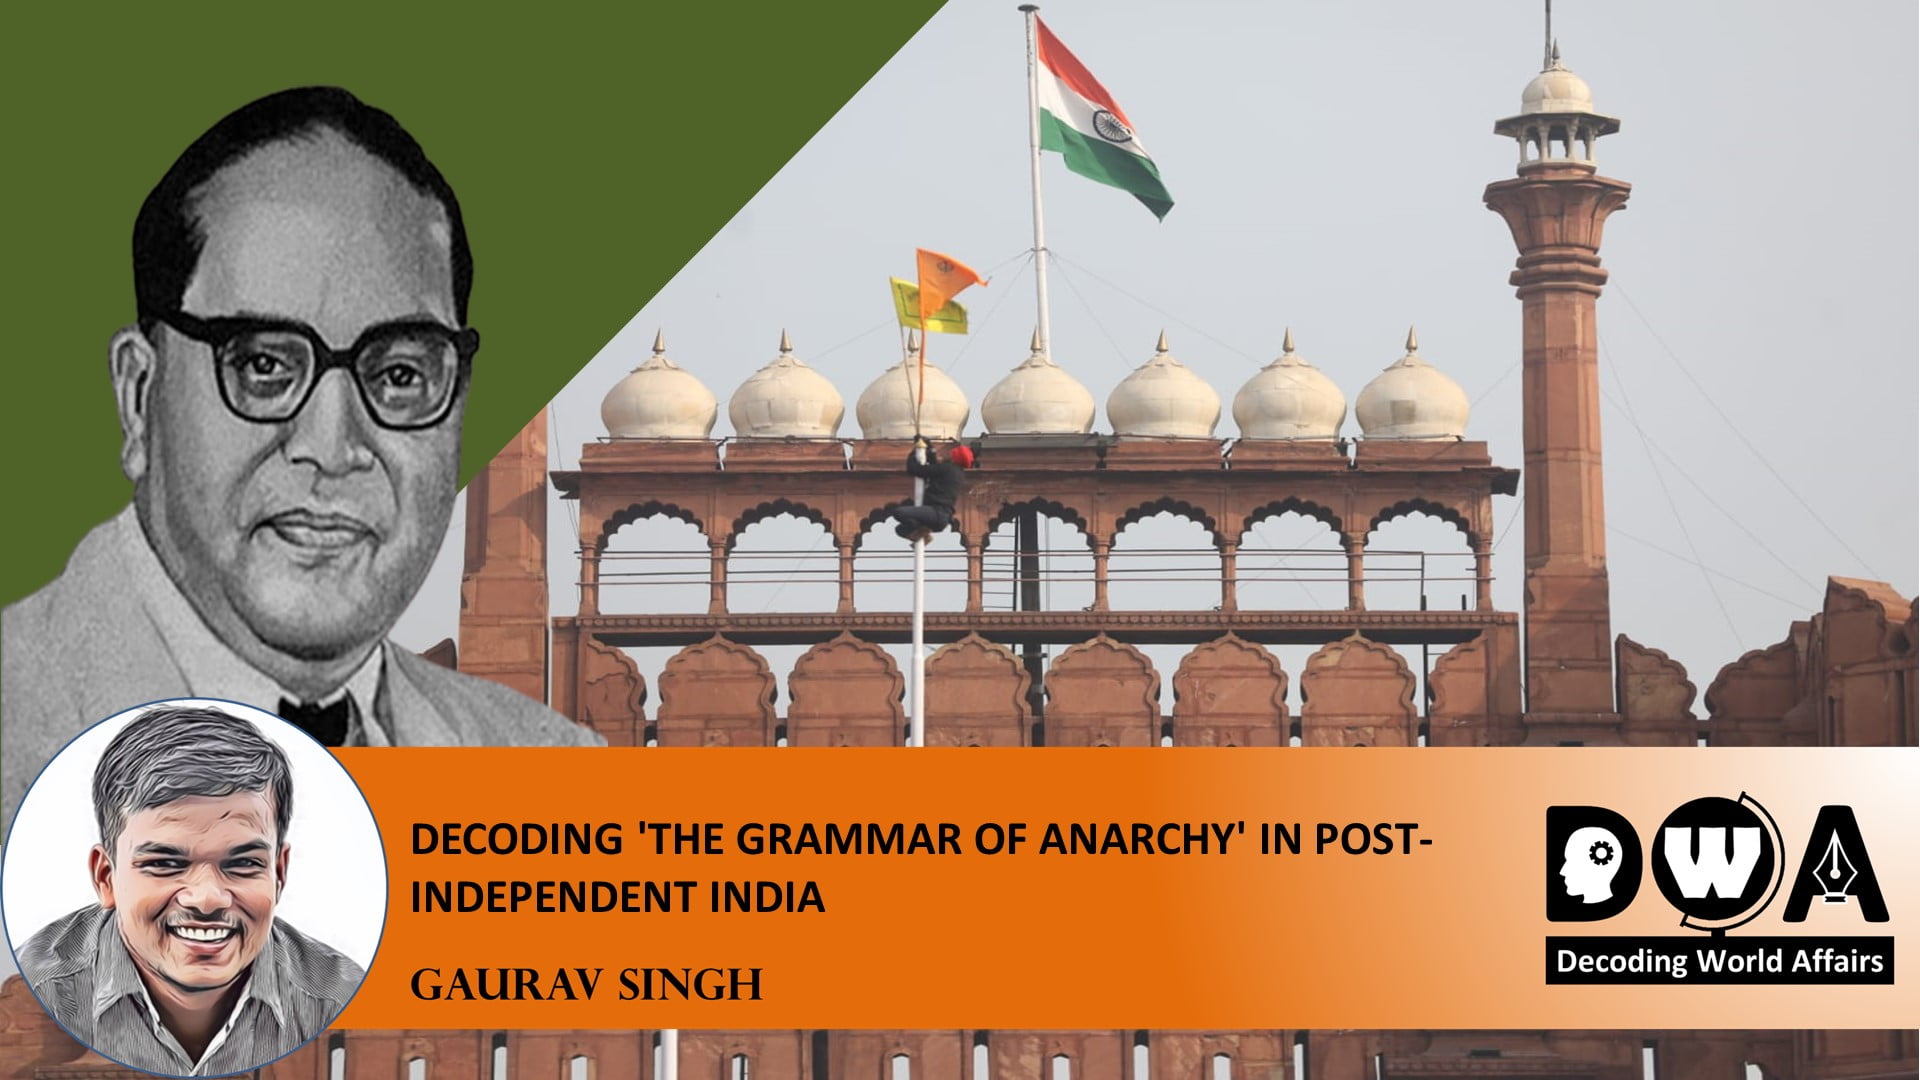 Decoding Grammer of Anarchy in post-independent India